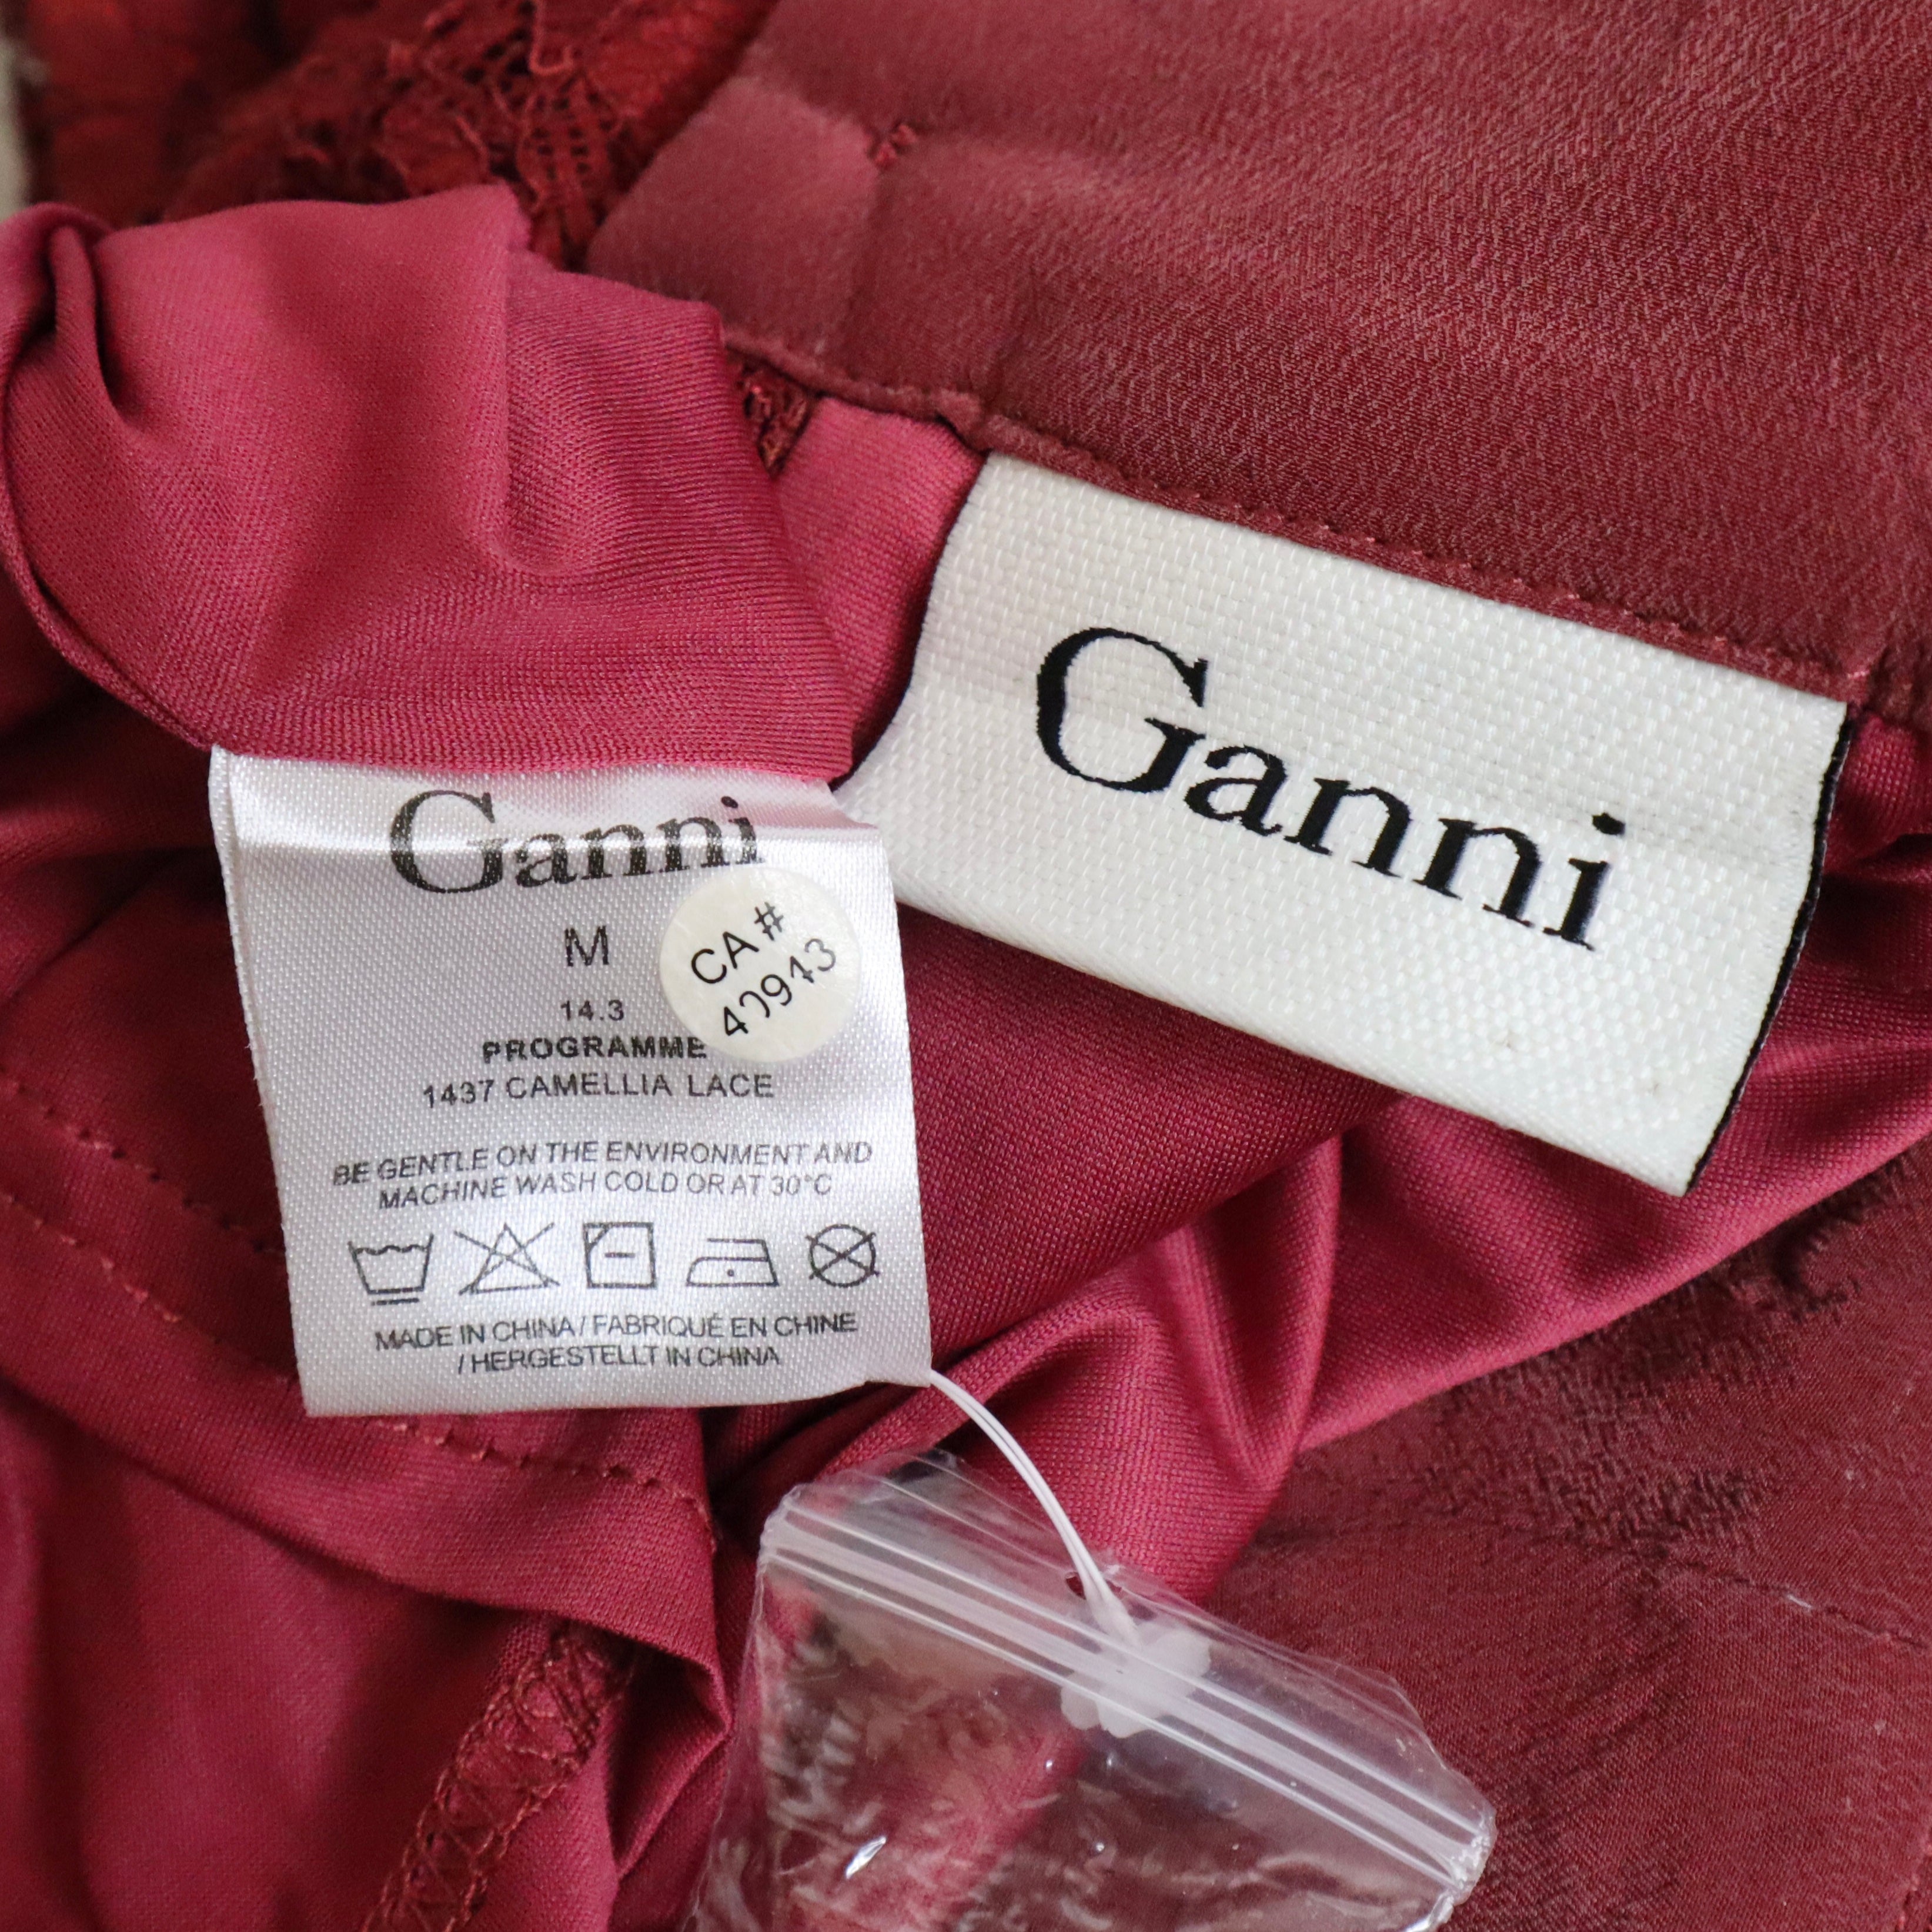 GANNI Red Lace Pencil Skirt (S/M)